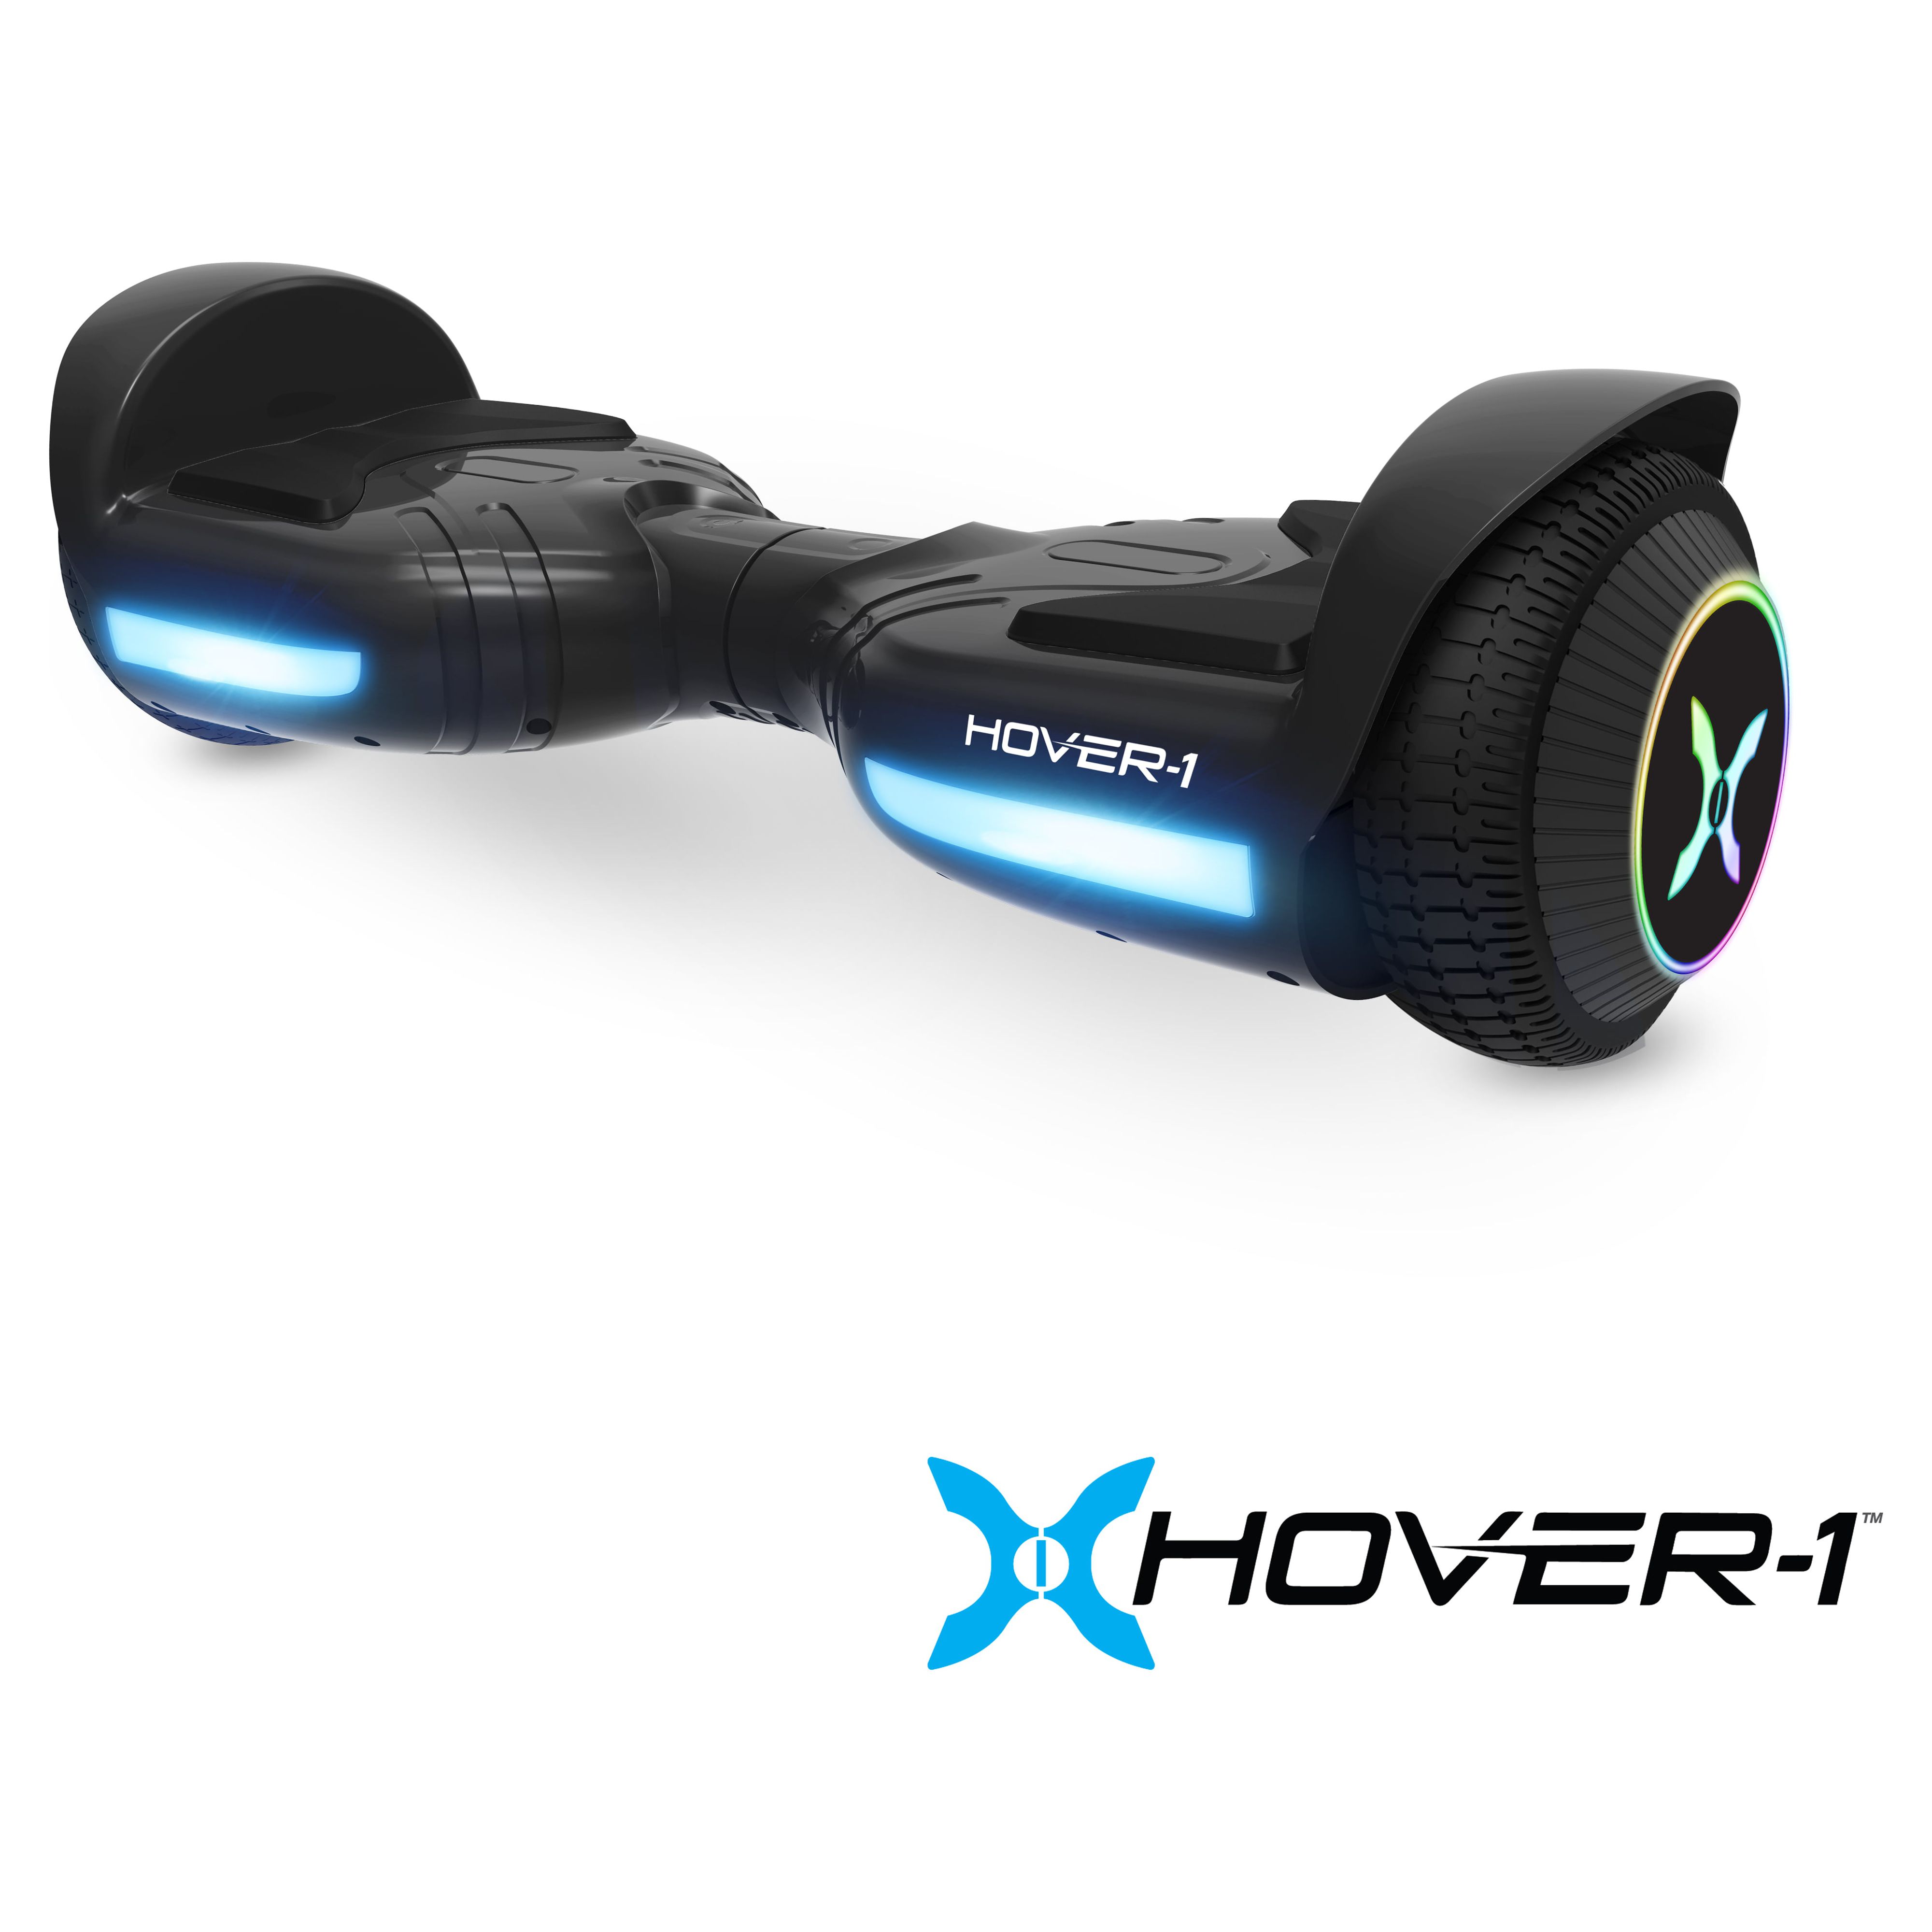 Hover-1 Nova Hoverboard Max Distance 6 Miles - image 10 of 11